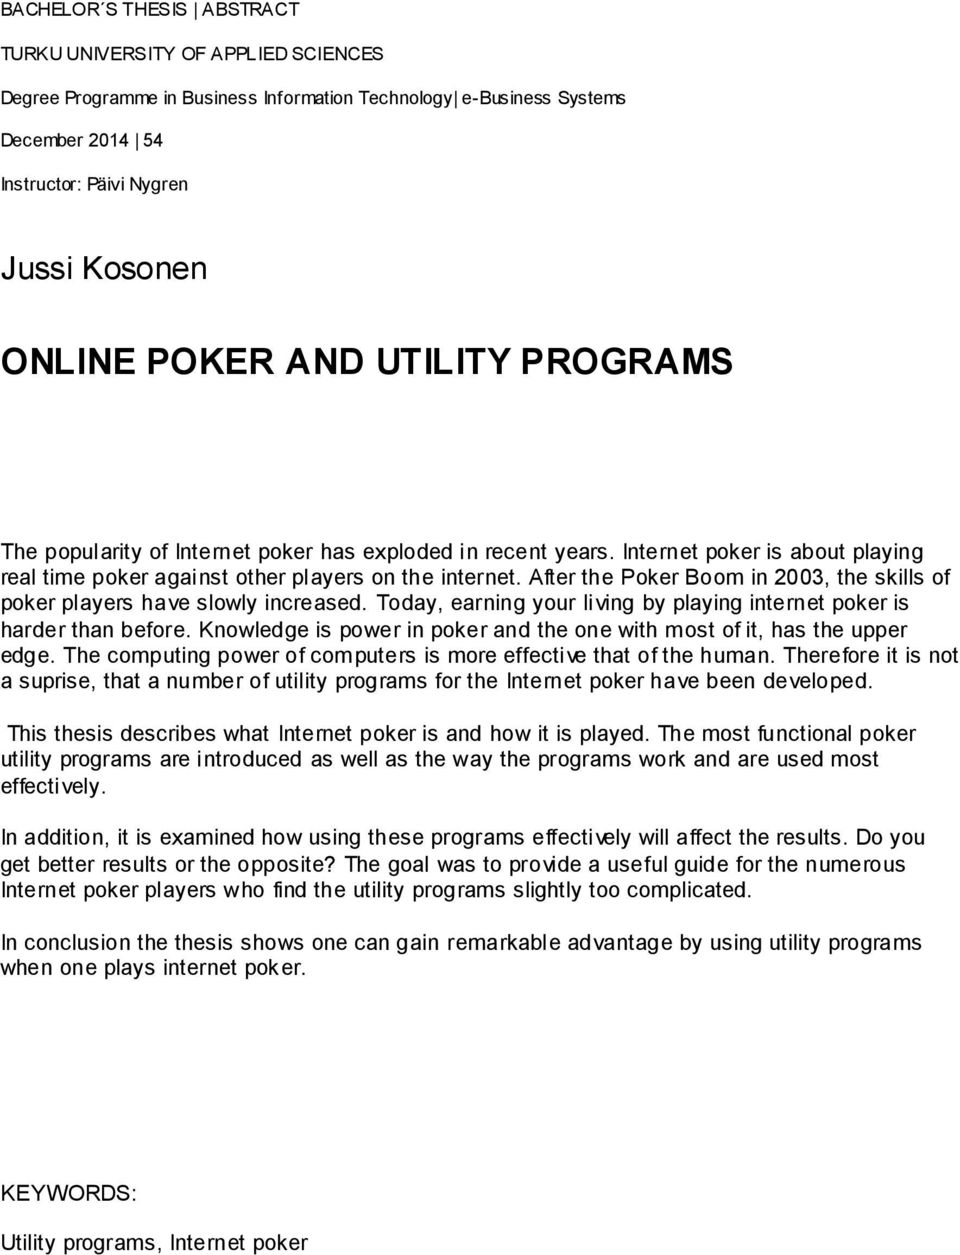 After the Poker Boom in 2003, the skills of poker players have slowly increased. Today, earning your living by playing internet poker is harder than before.